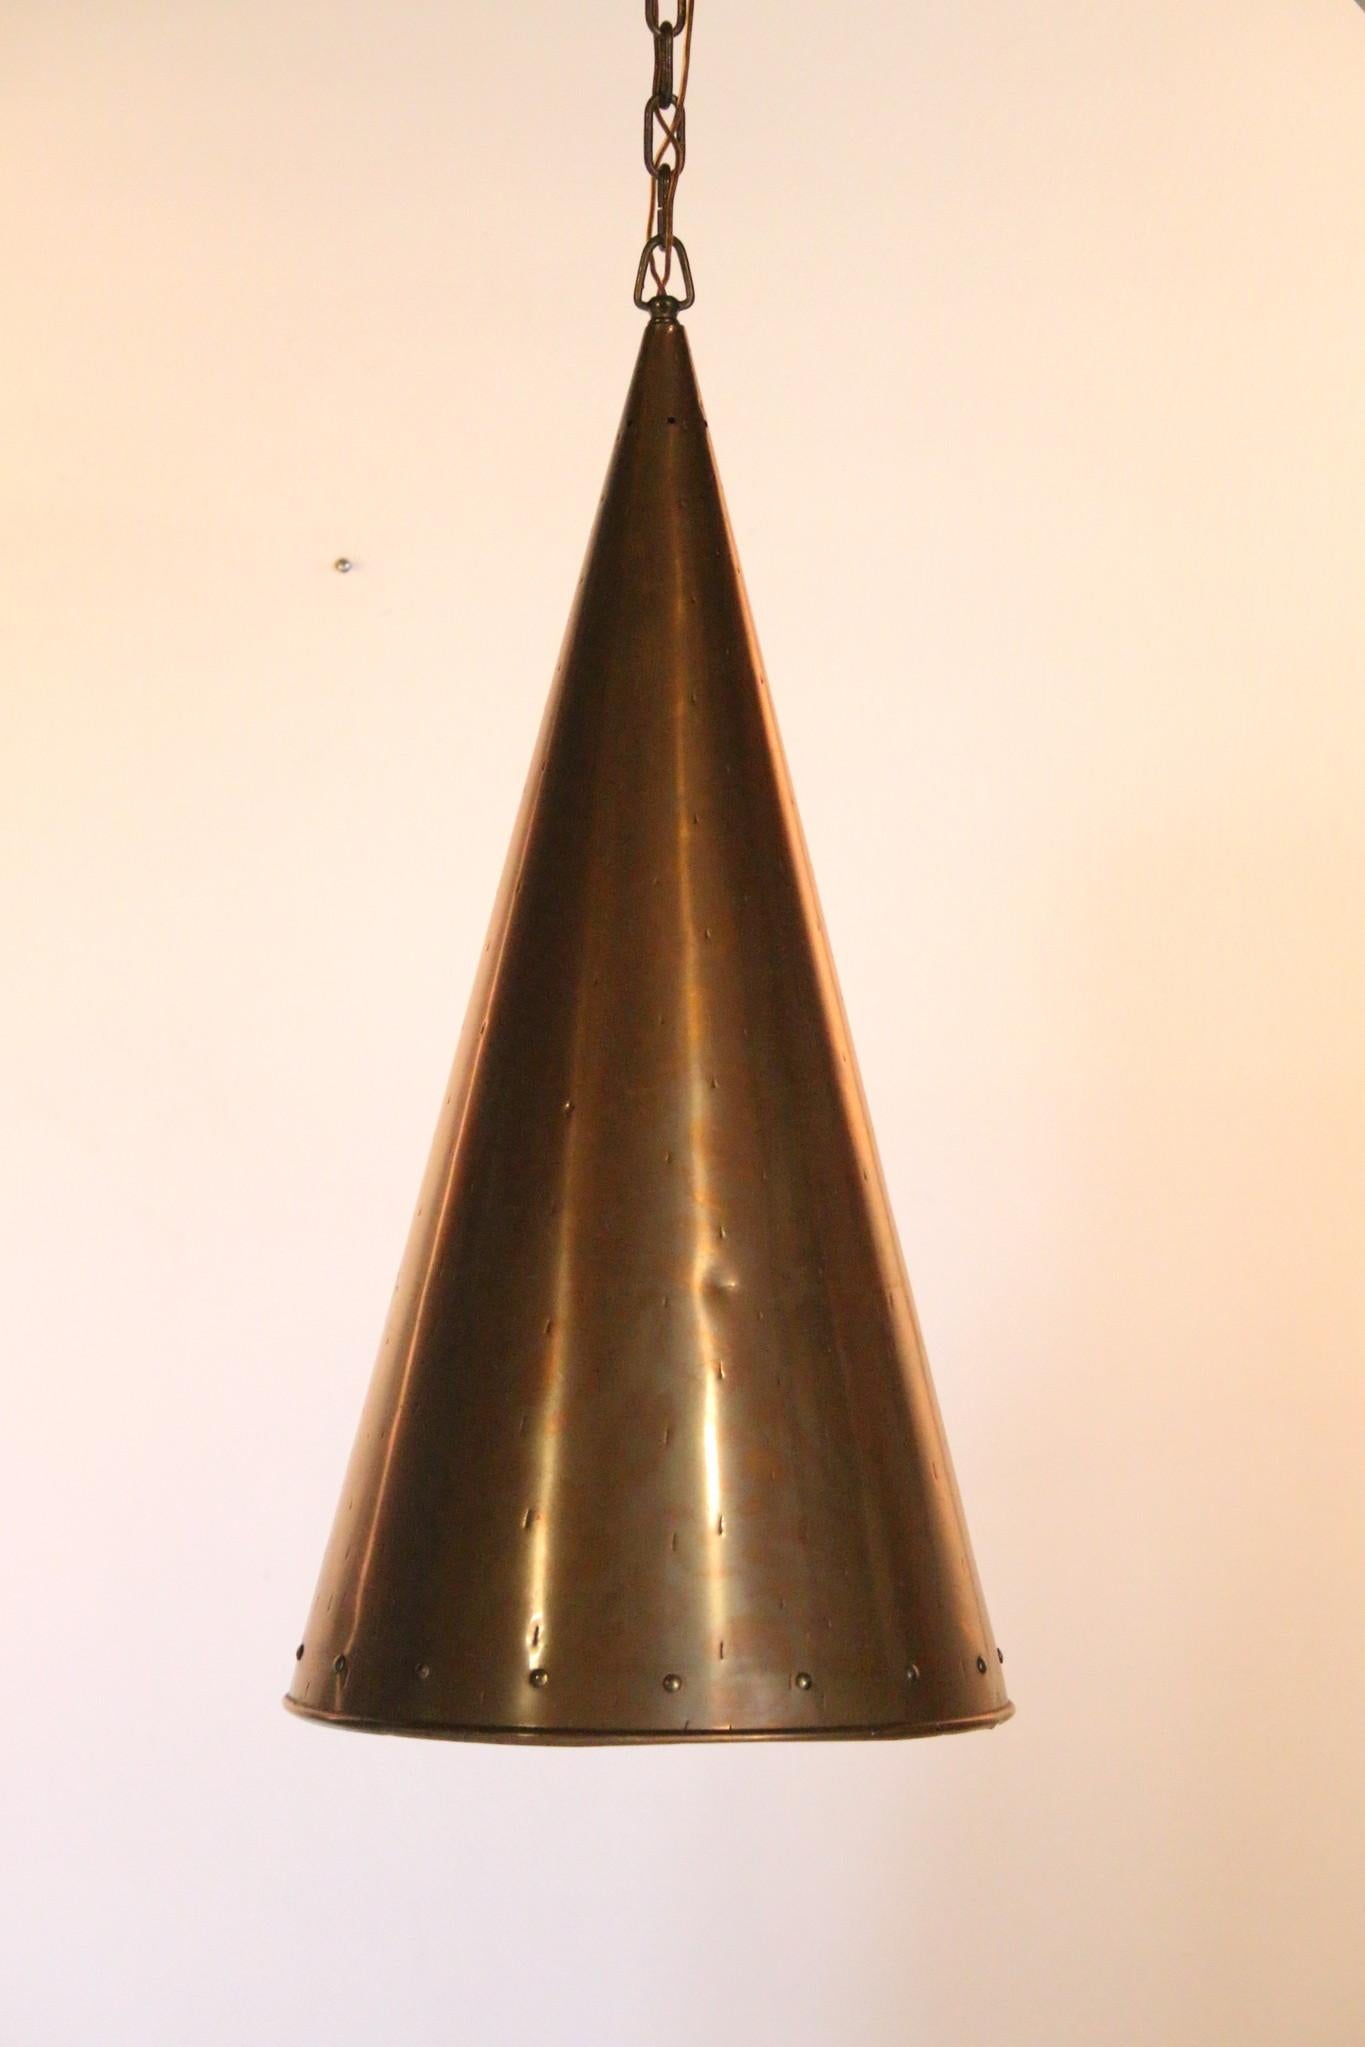 Danish Hand Hammered Copper Pendant Lamp from E.S Horn Aalestrup, 50s For Sale 1